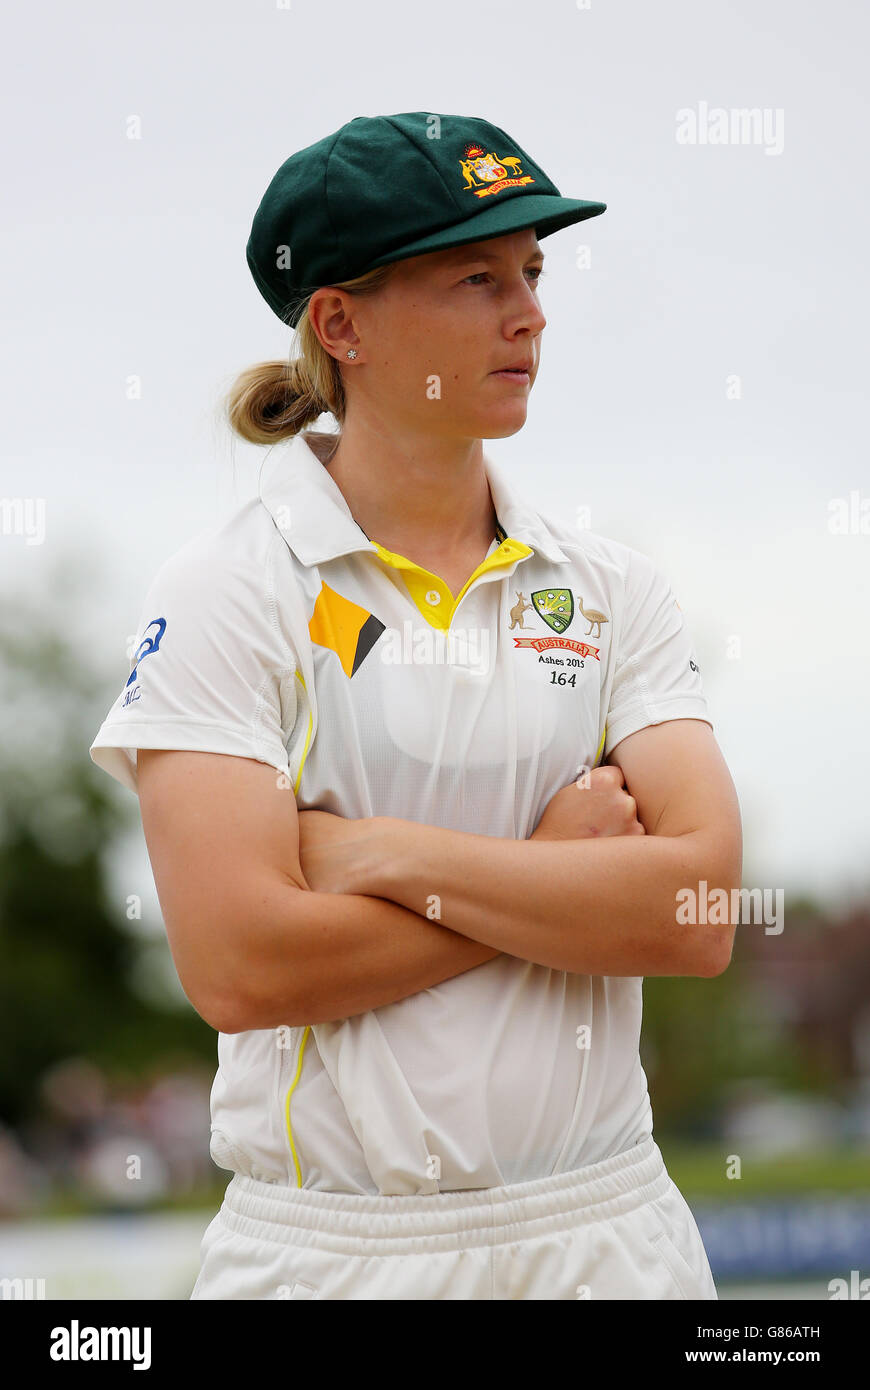 Meg Lanning of Delhi Capitals seen prior to the Women's Premier News  Photo - Getty Images